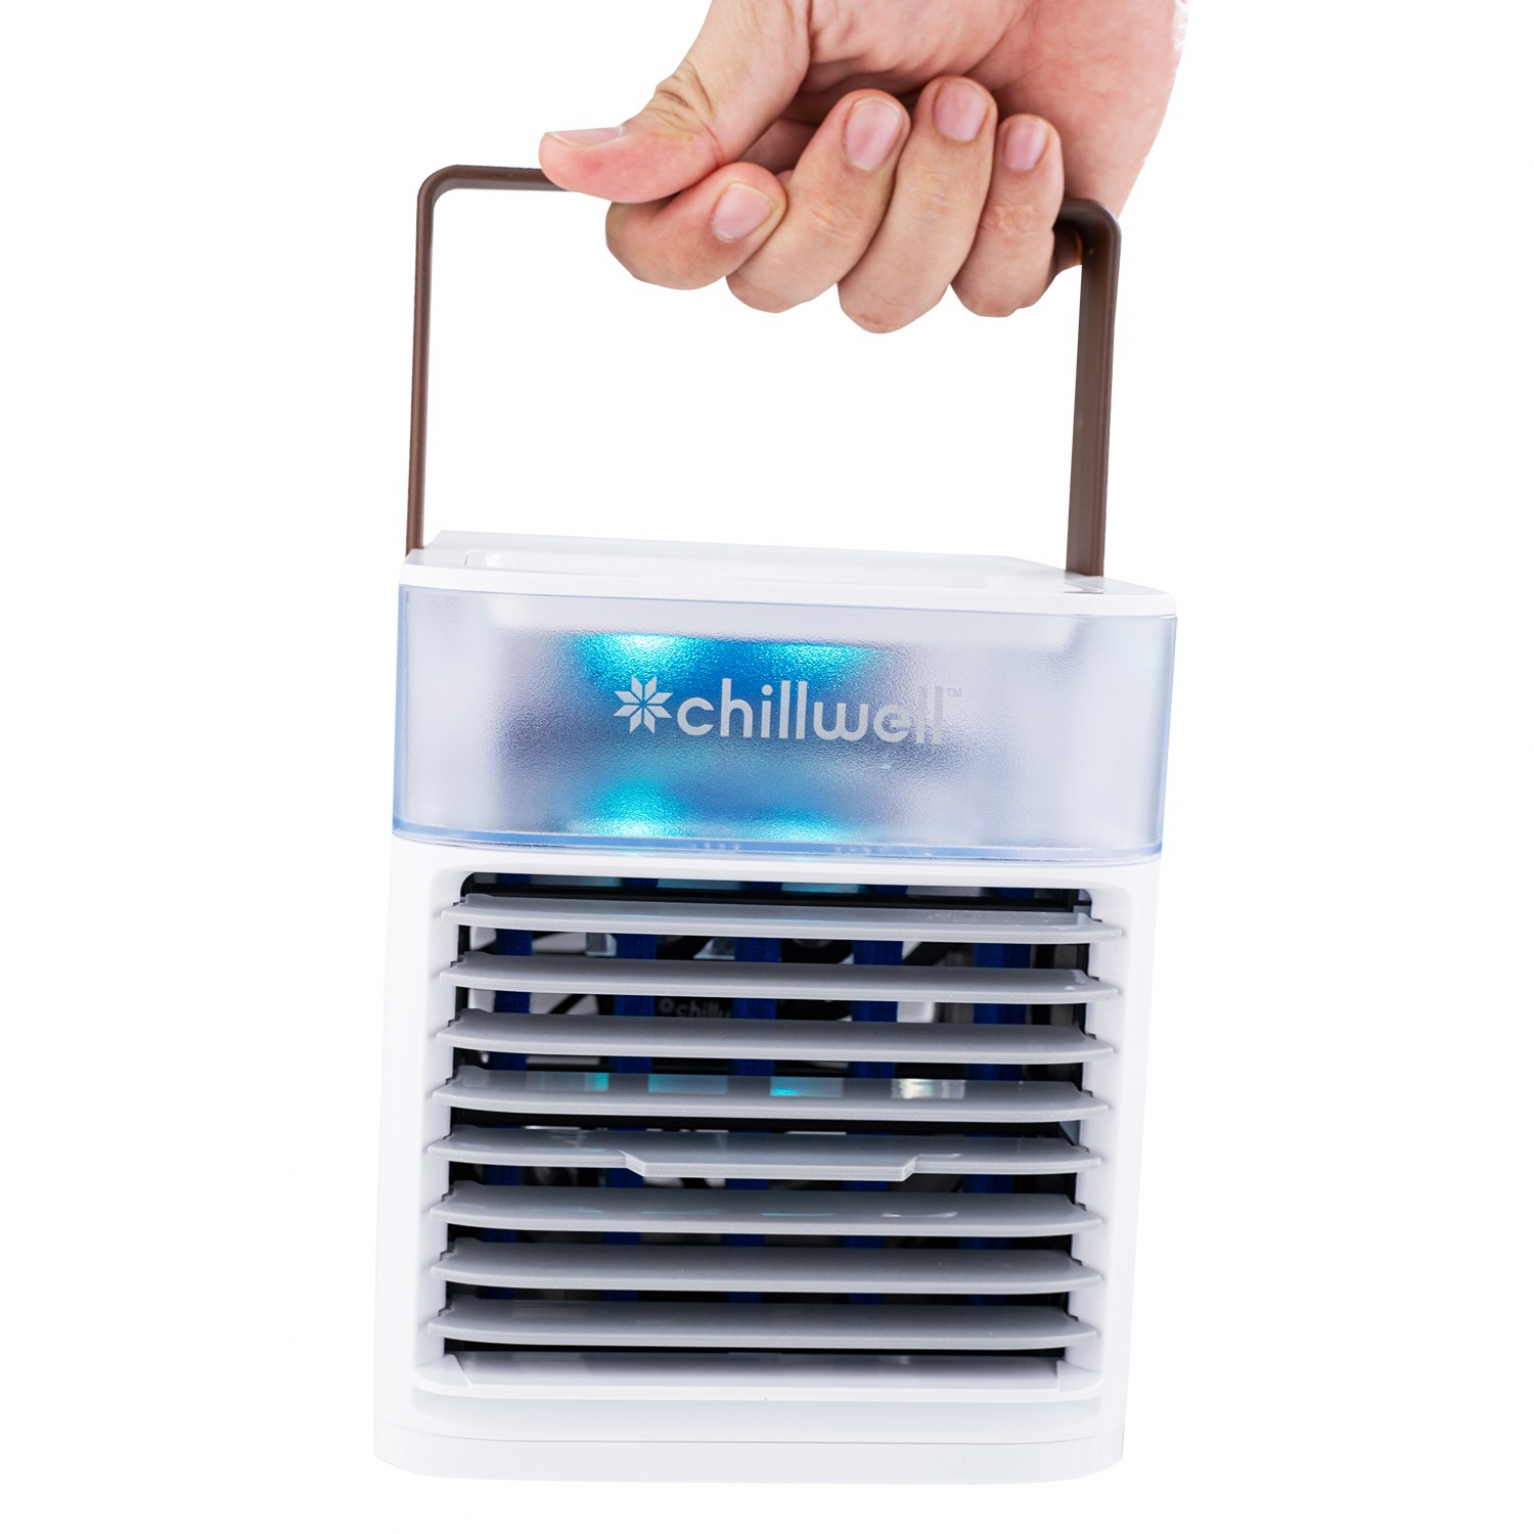 Chillwell AC Pro Portable Air Conditioner